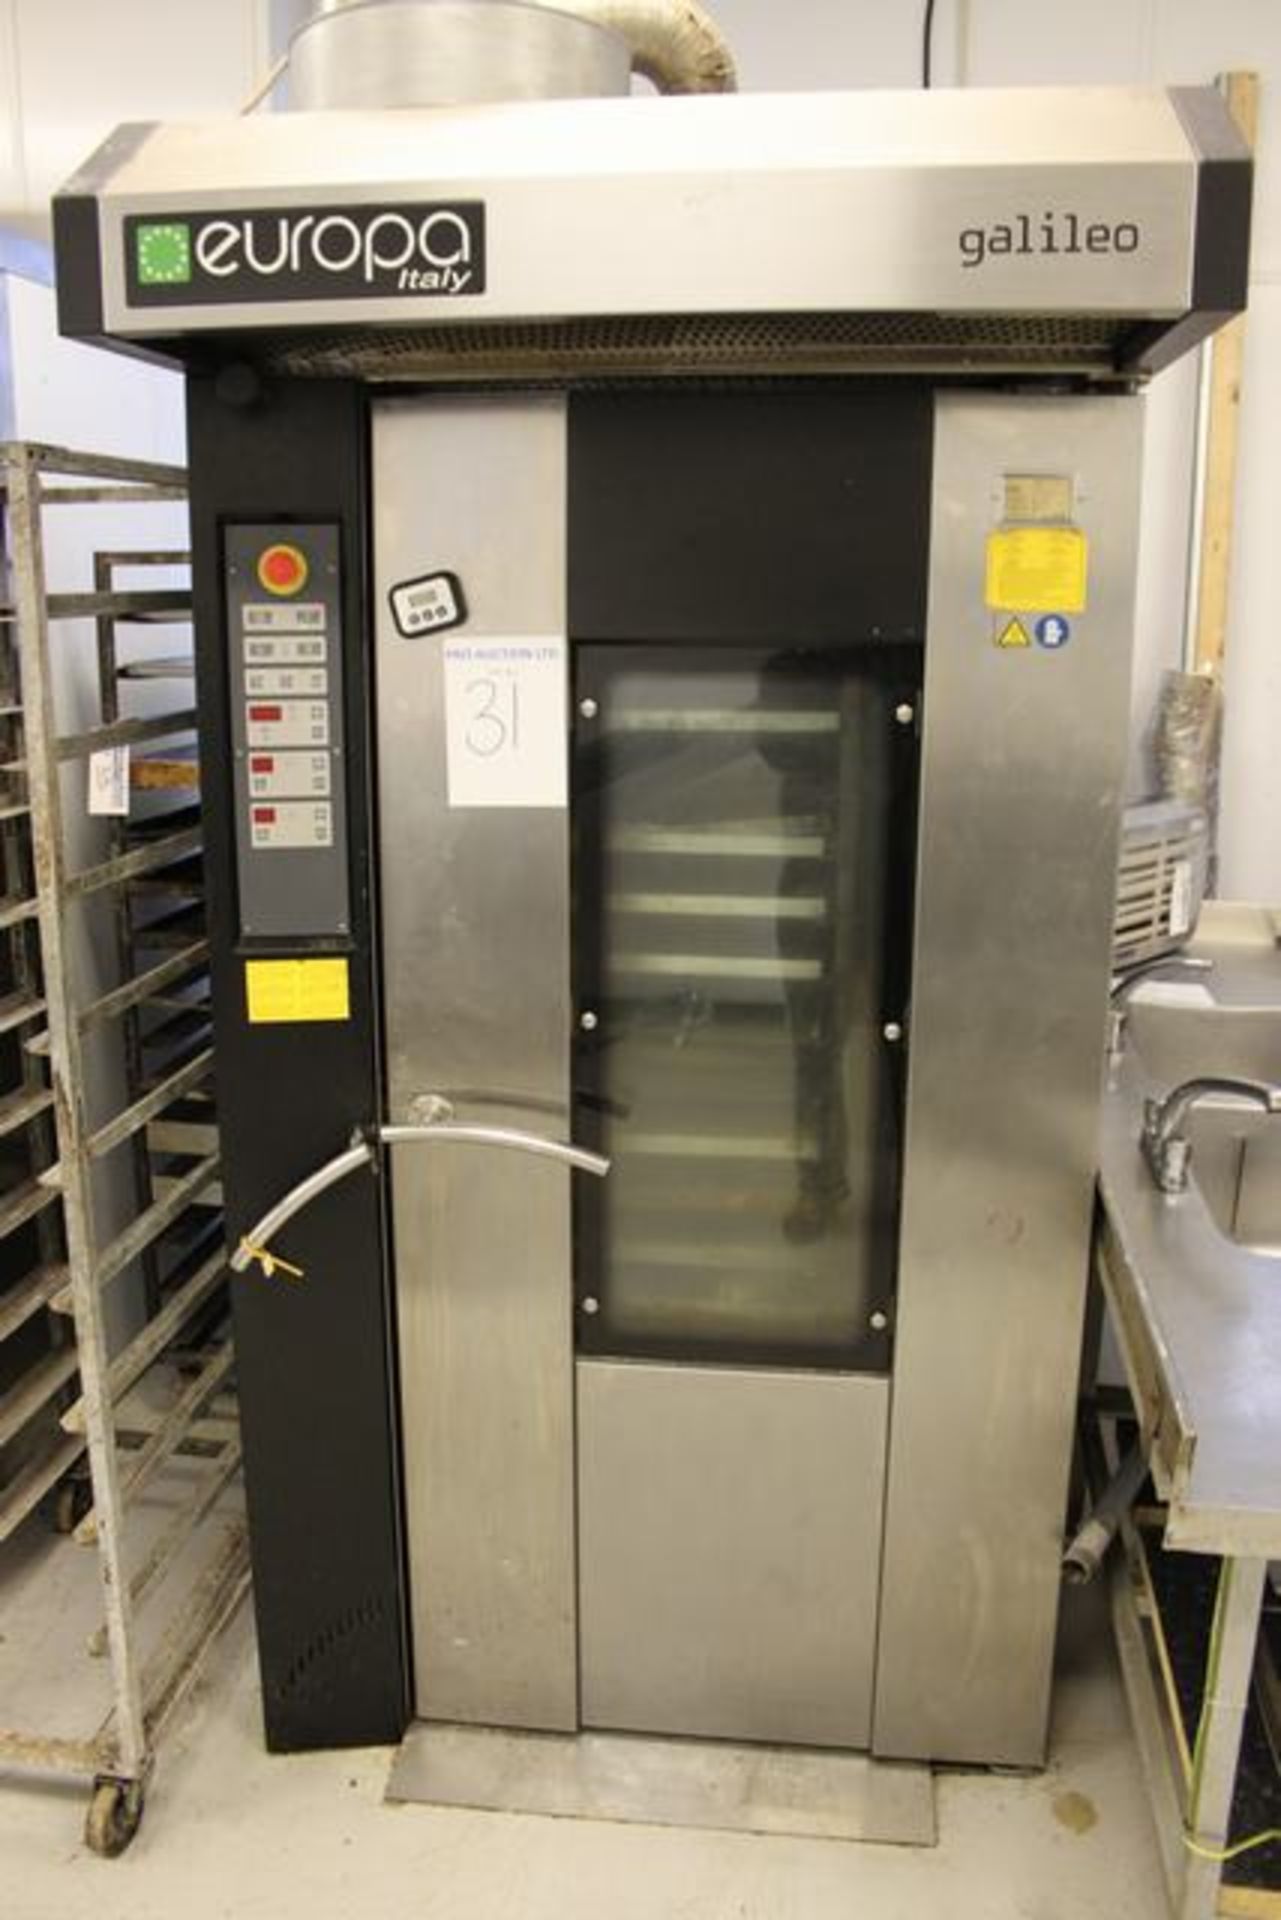 Europa Galileo gas oil rotary rack oven single rack model 89C/B23 200.000Btu   Lift out charge 200 - Image 2 of 3